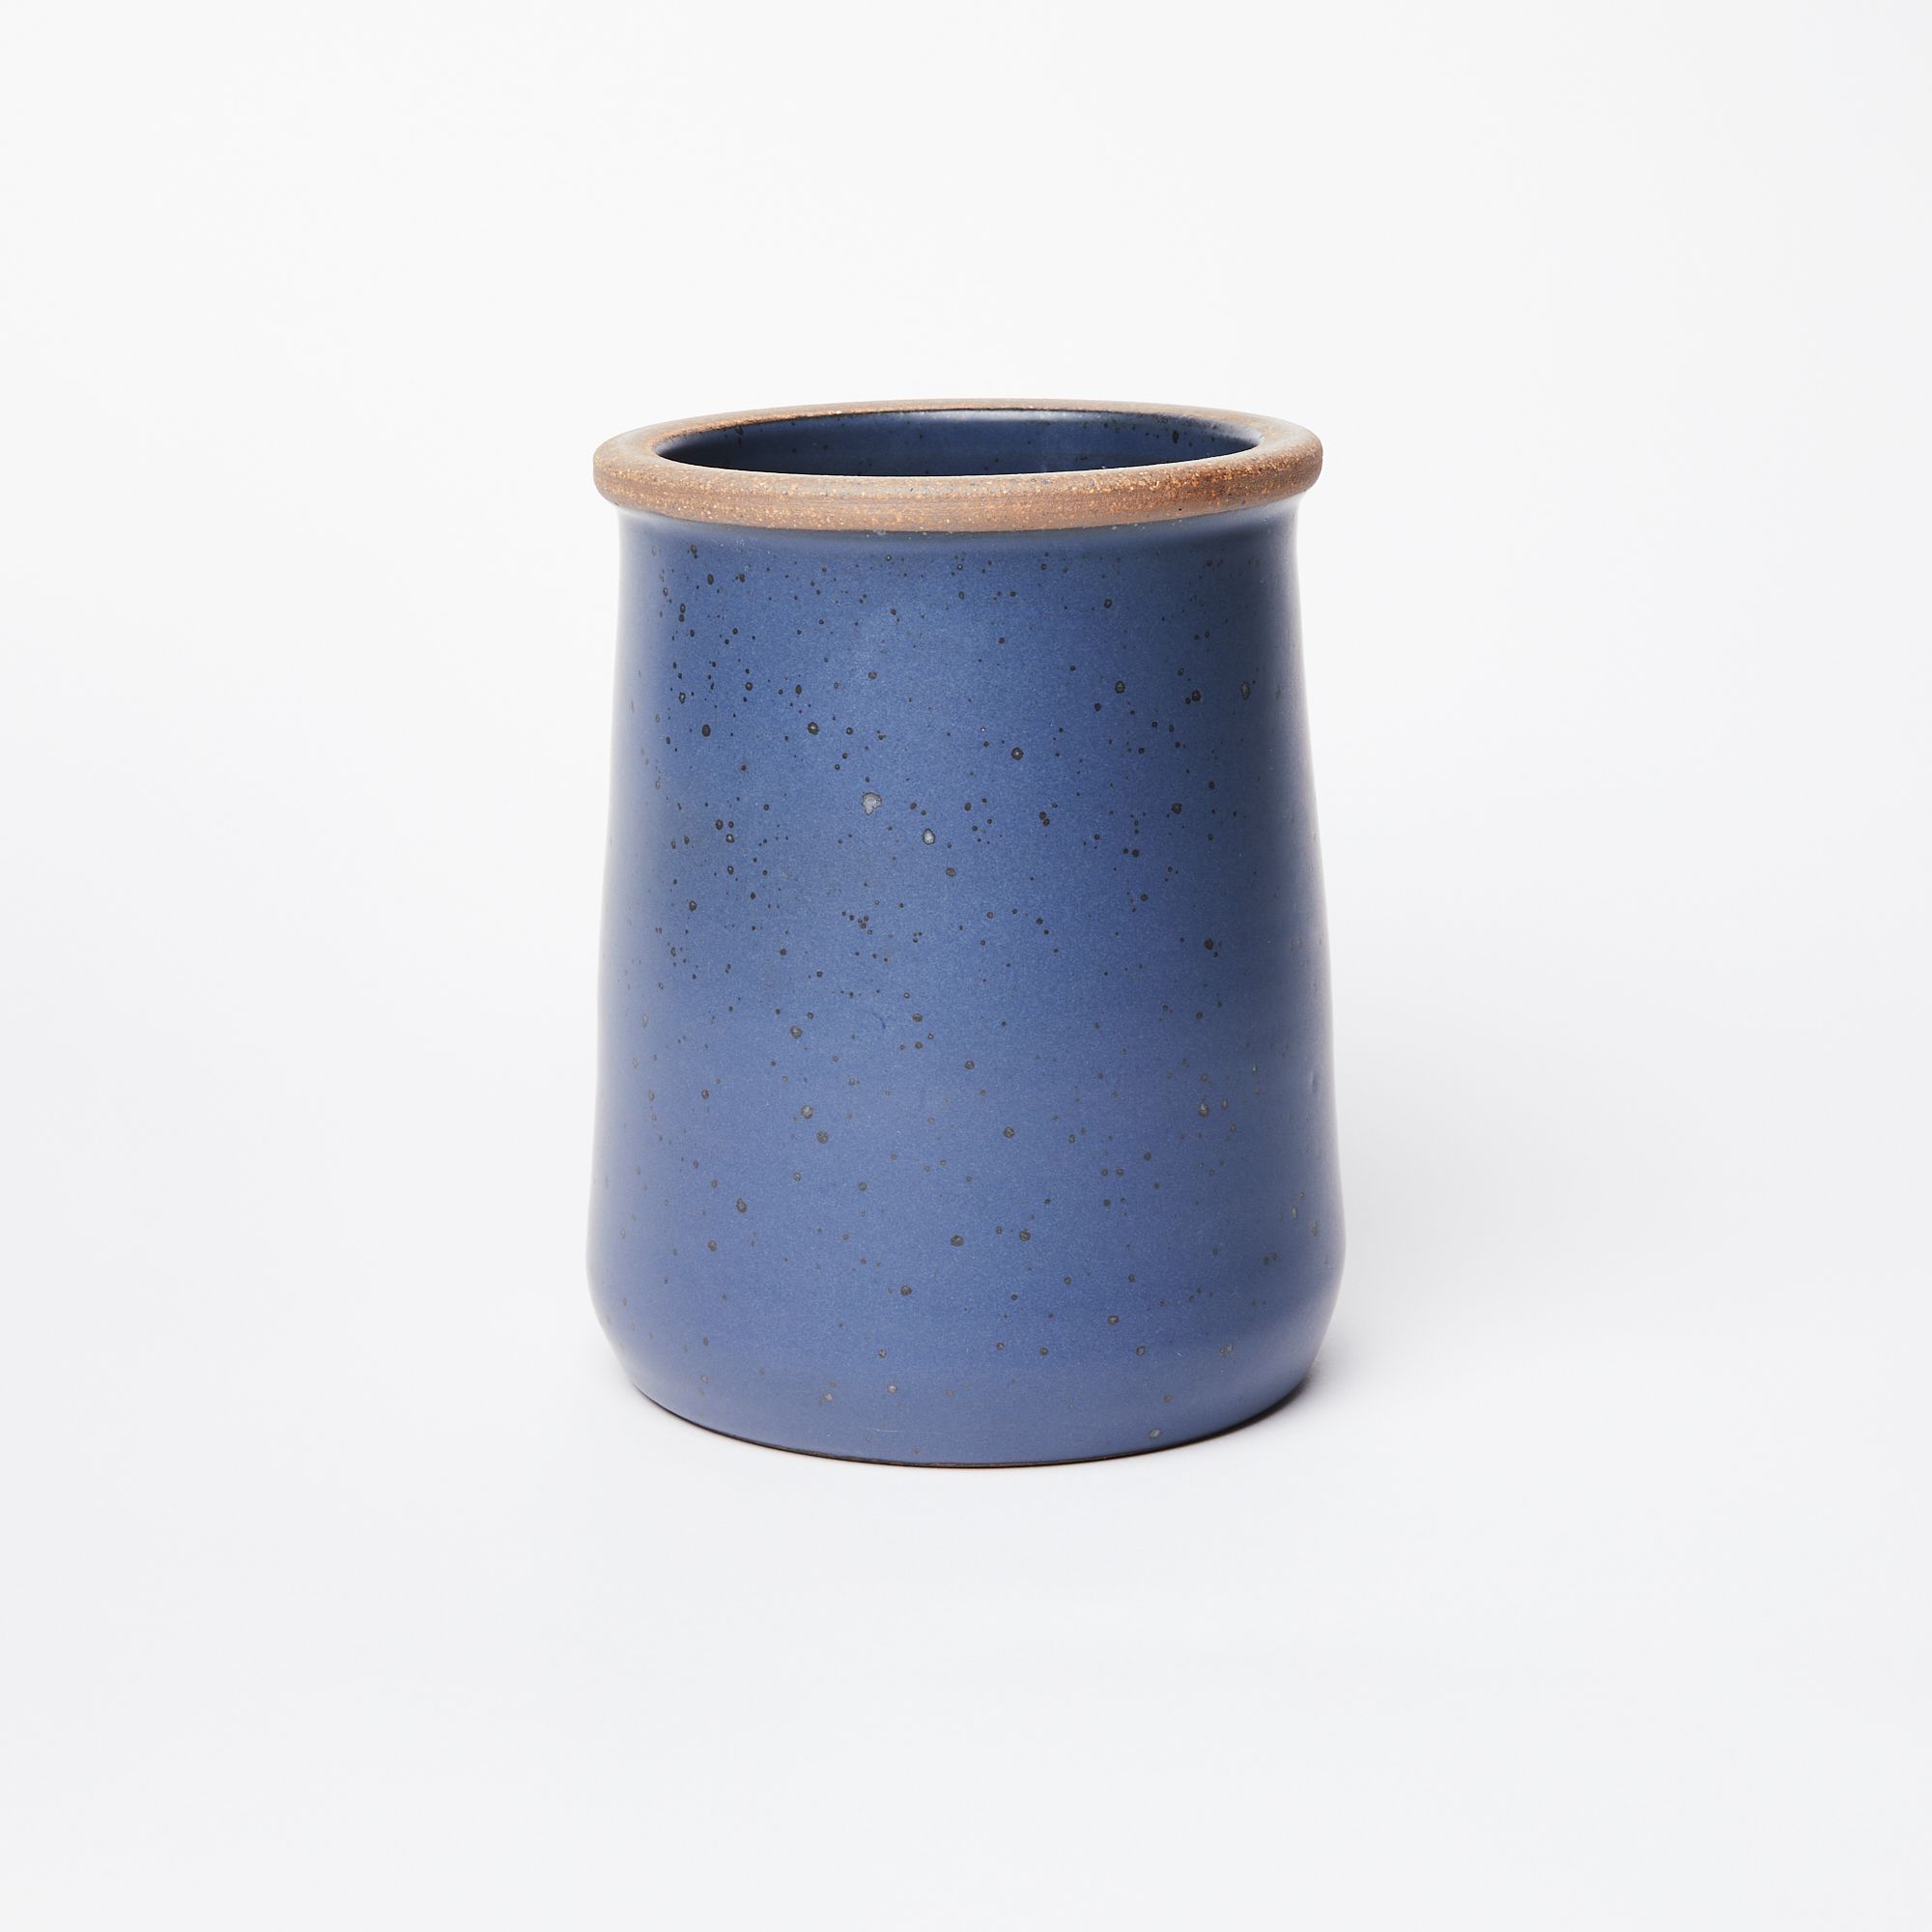 Custom Midnight Blue And Tan Kitchen Utensil Holder by Tulane Road Pottery